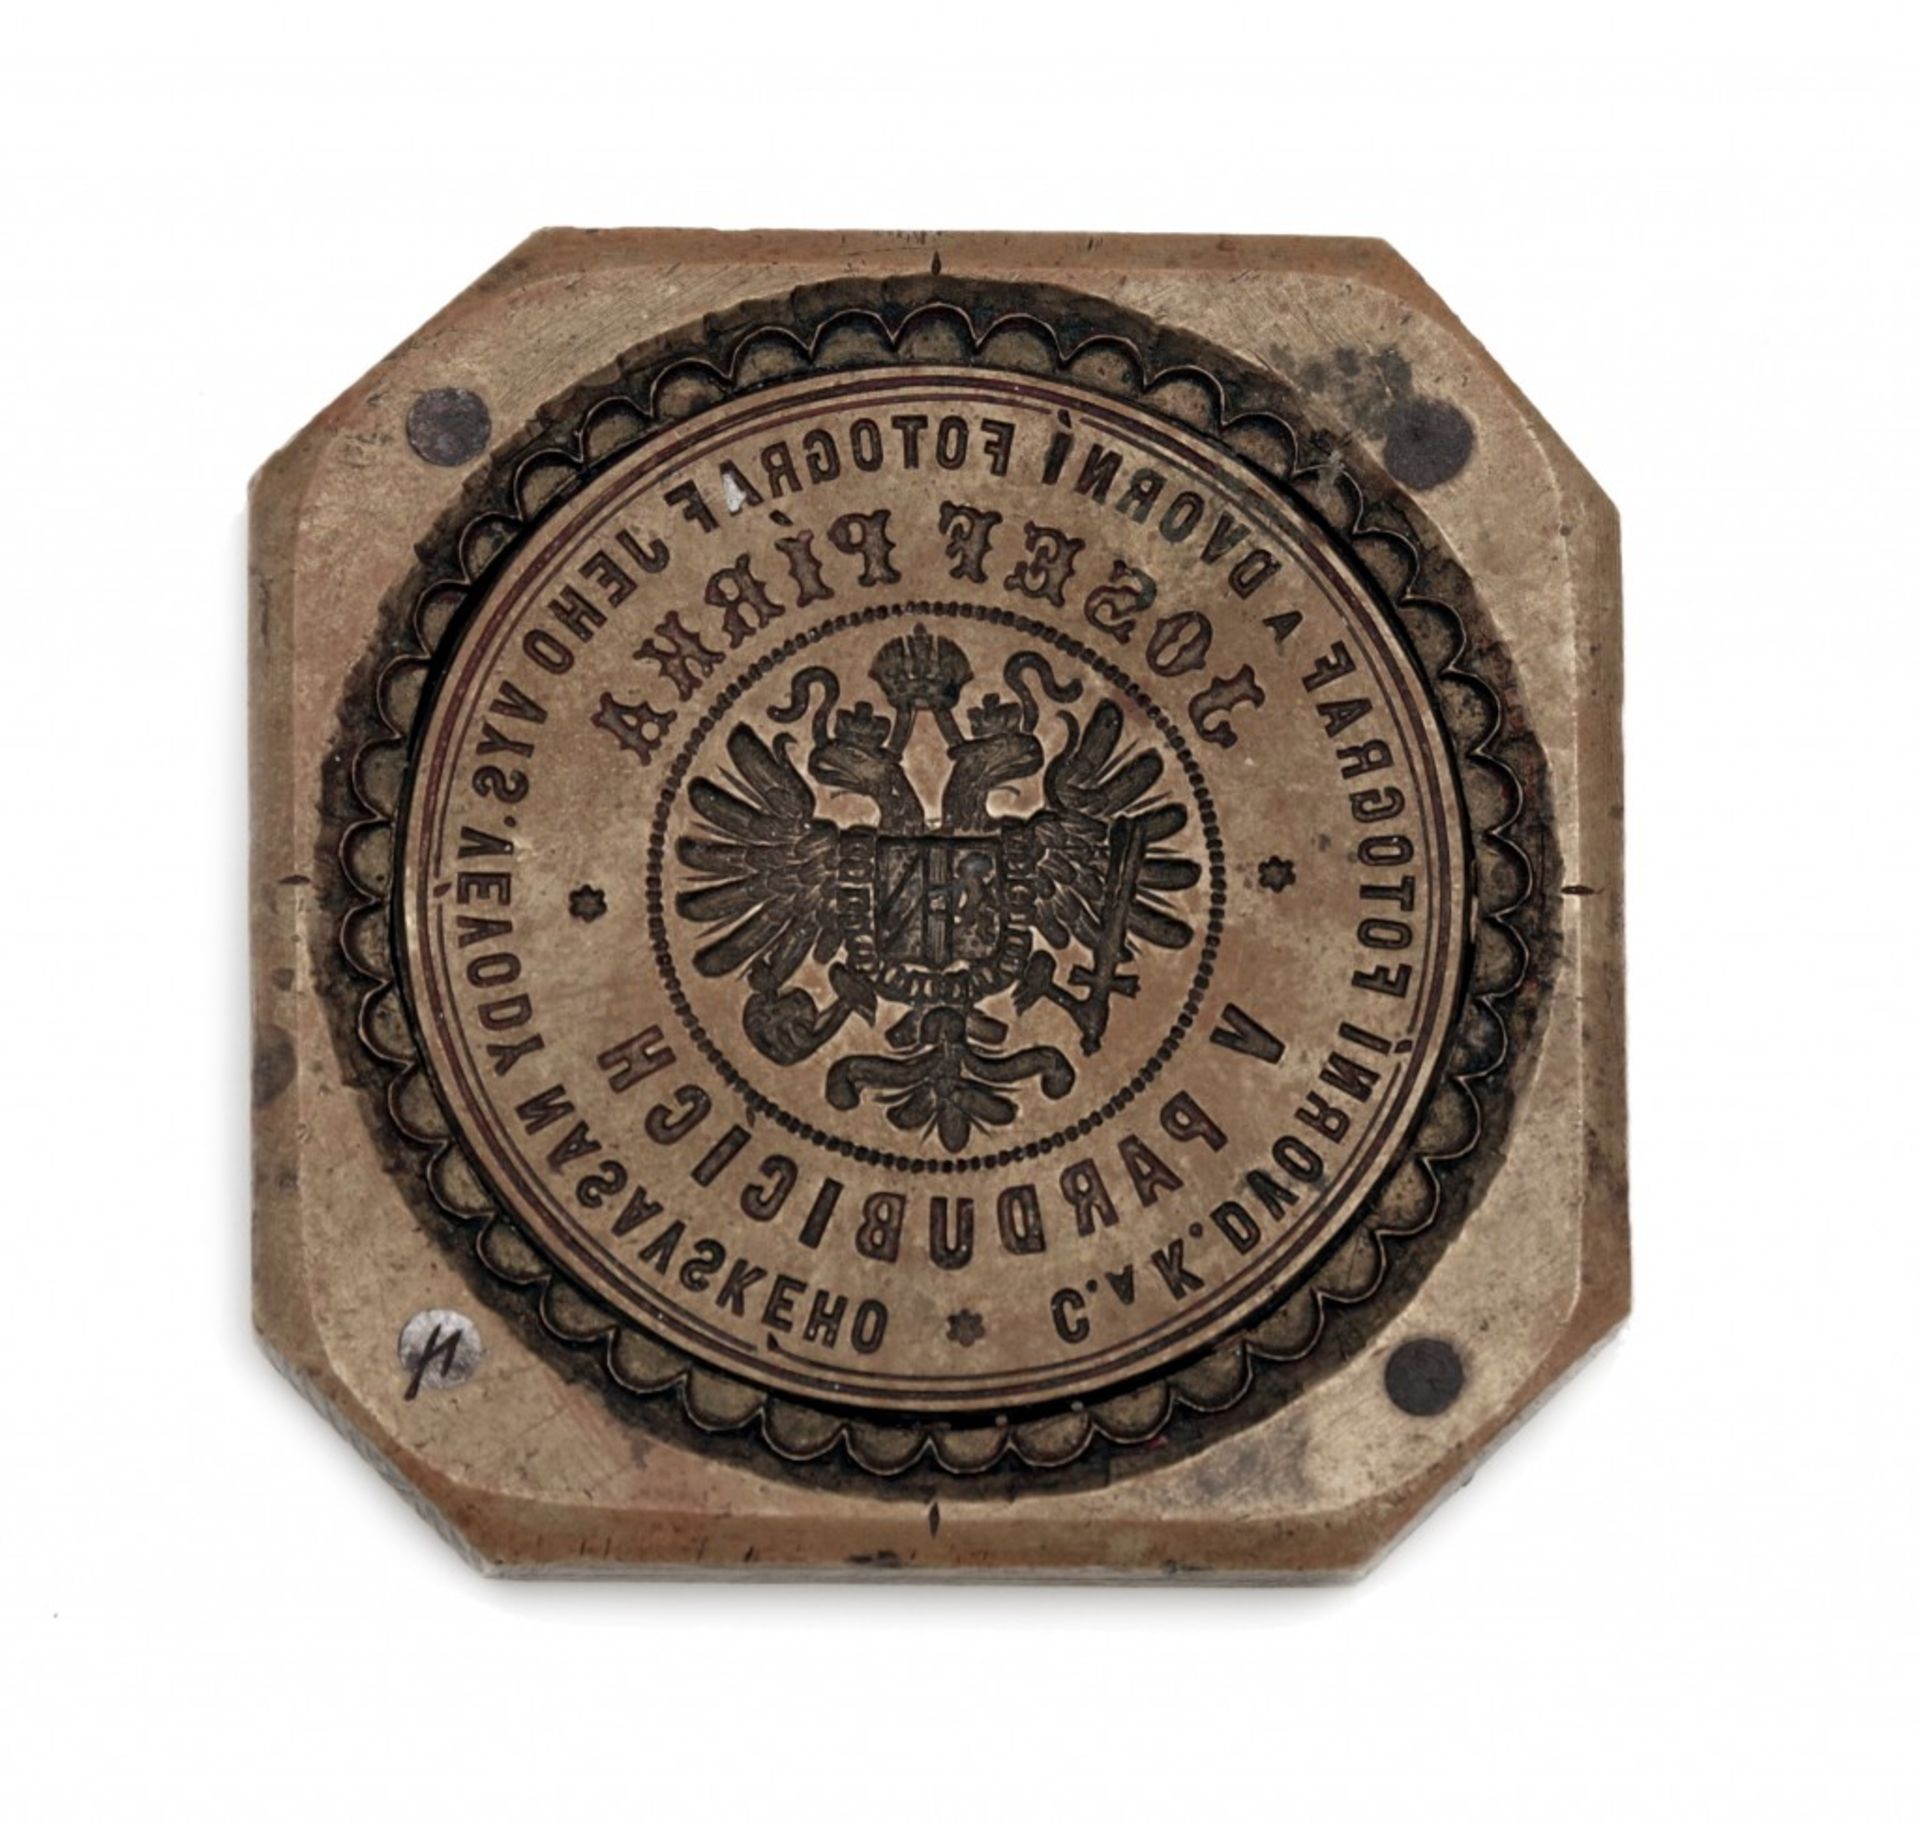 Seal of of Photographer Josef Pirka with Coat of Arms